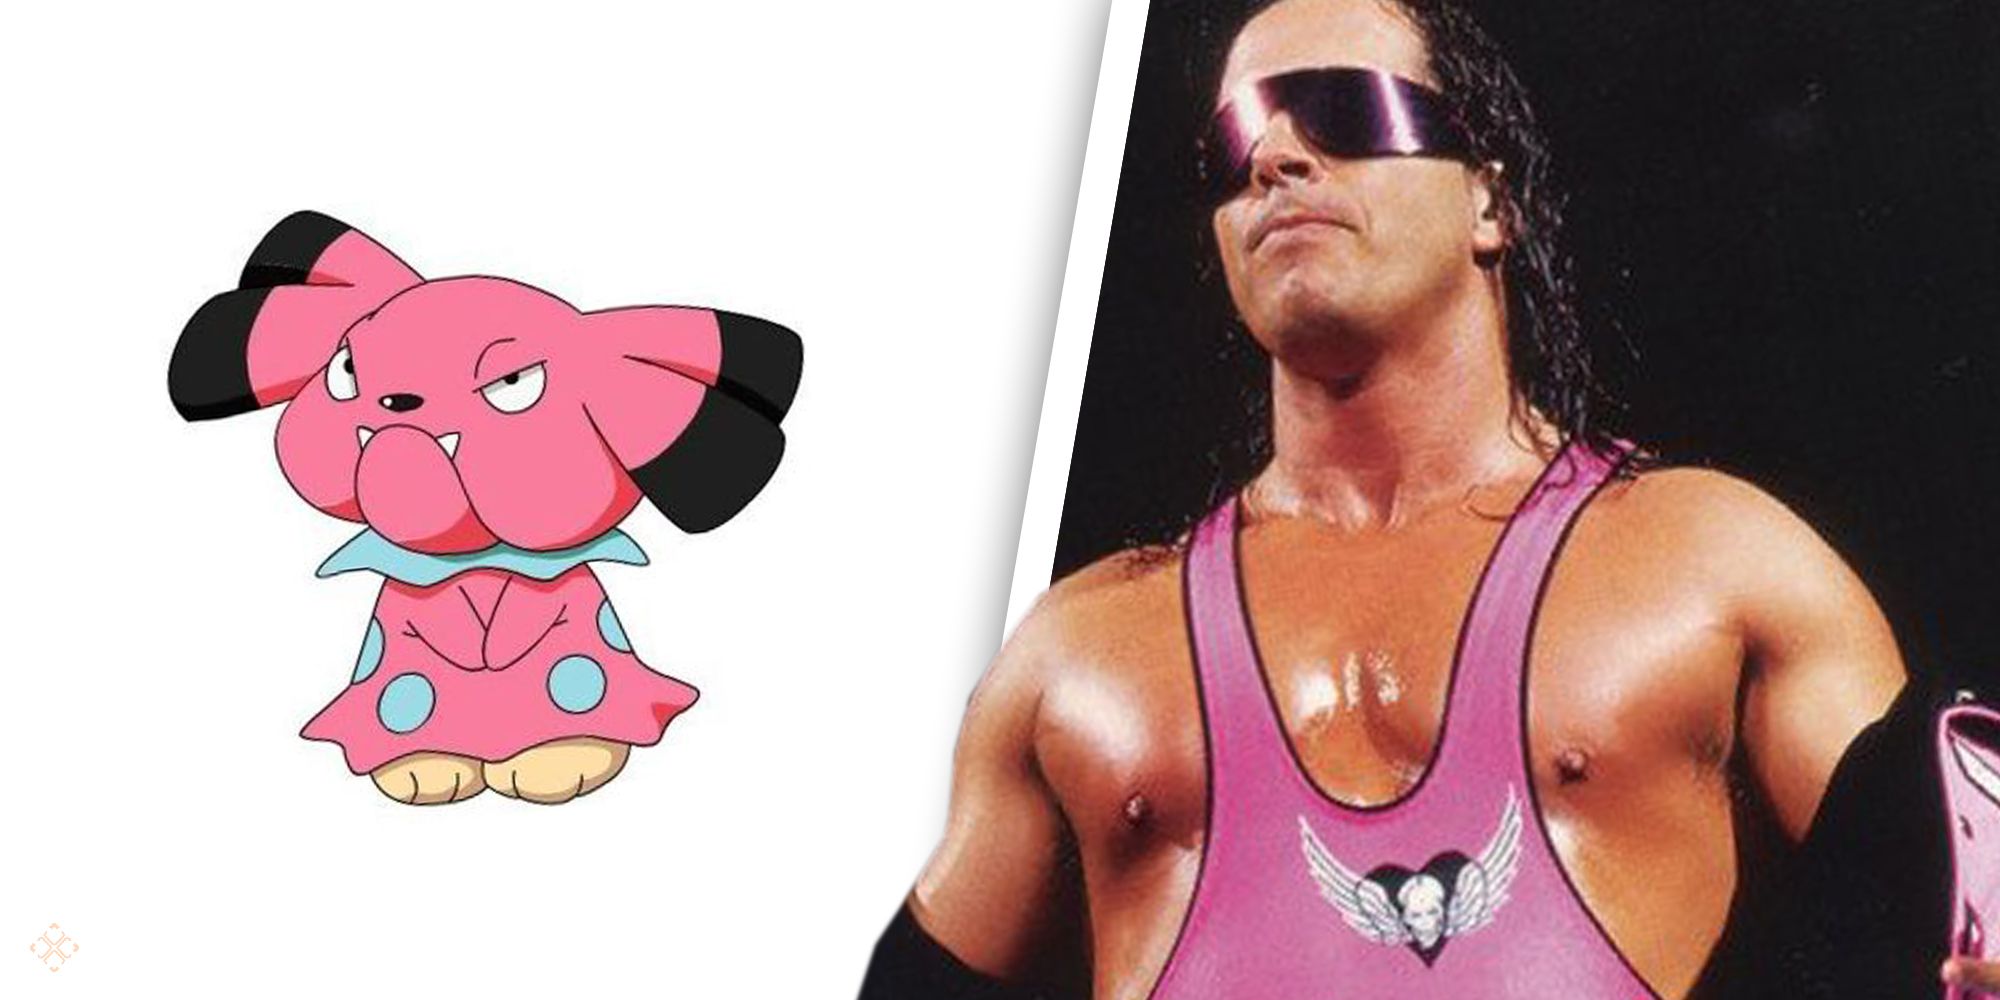 Heres 30 Wrestlers As Pokemon For The Royal Rumble (4)